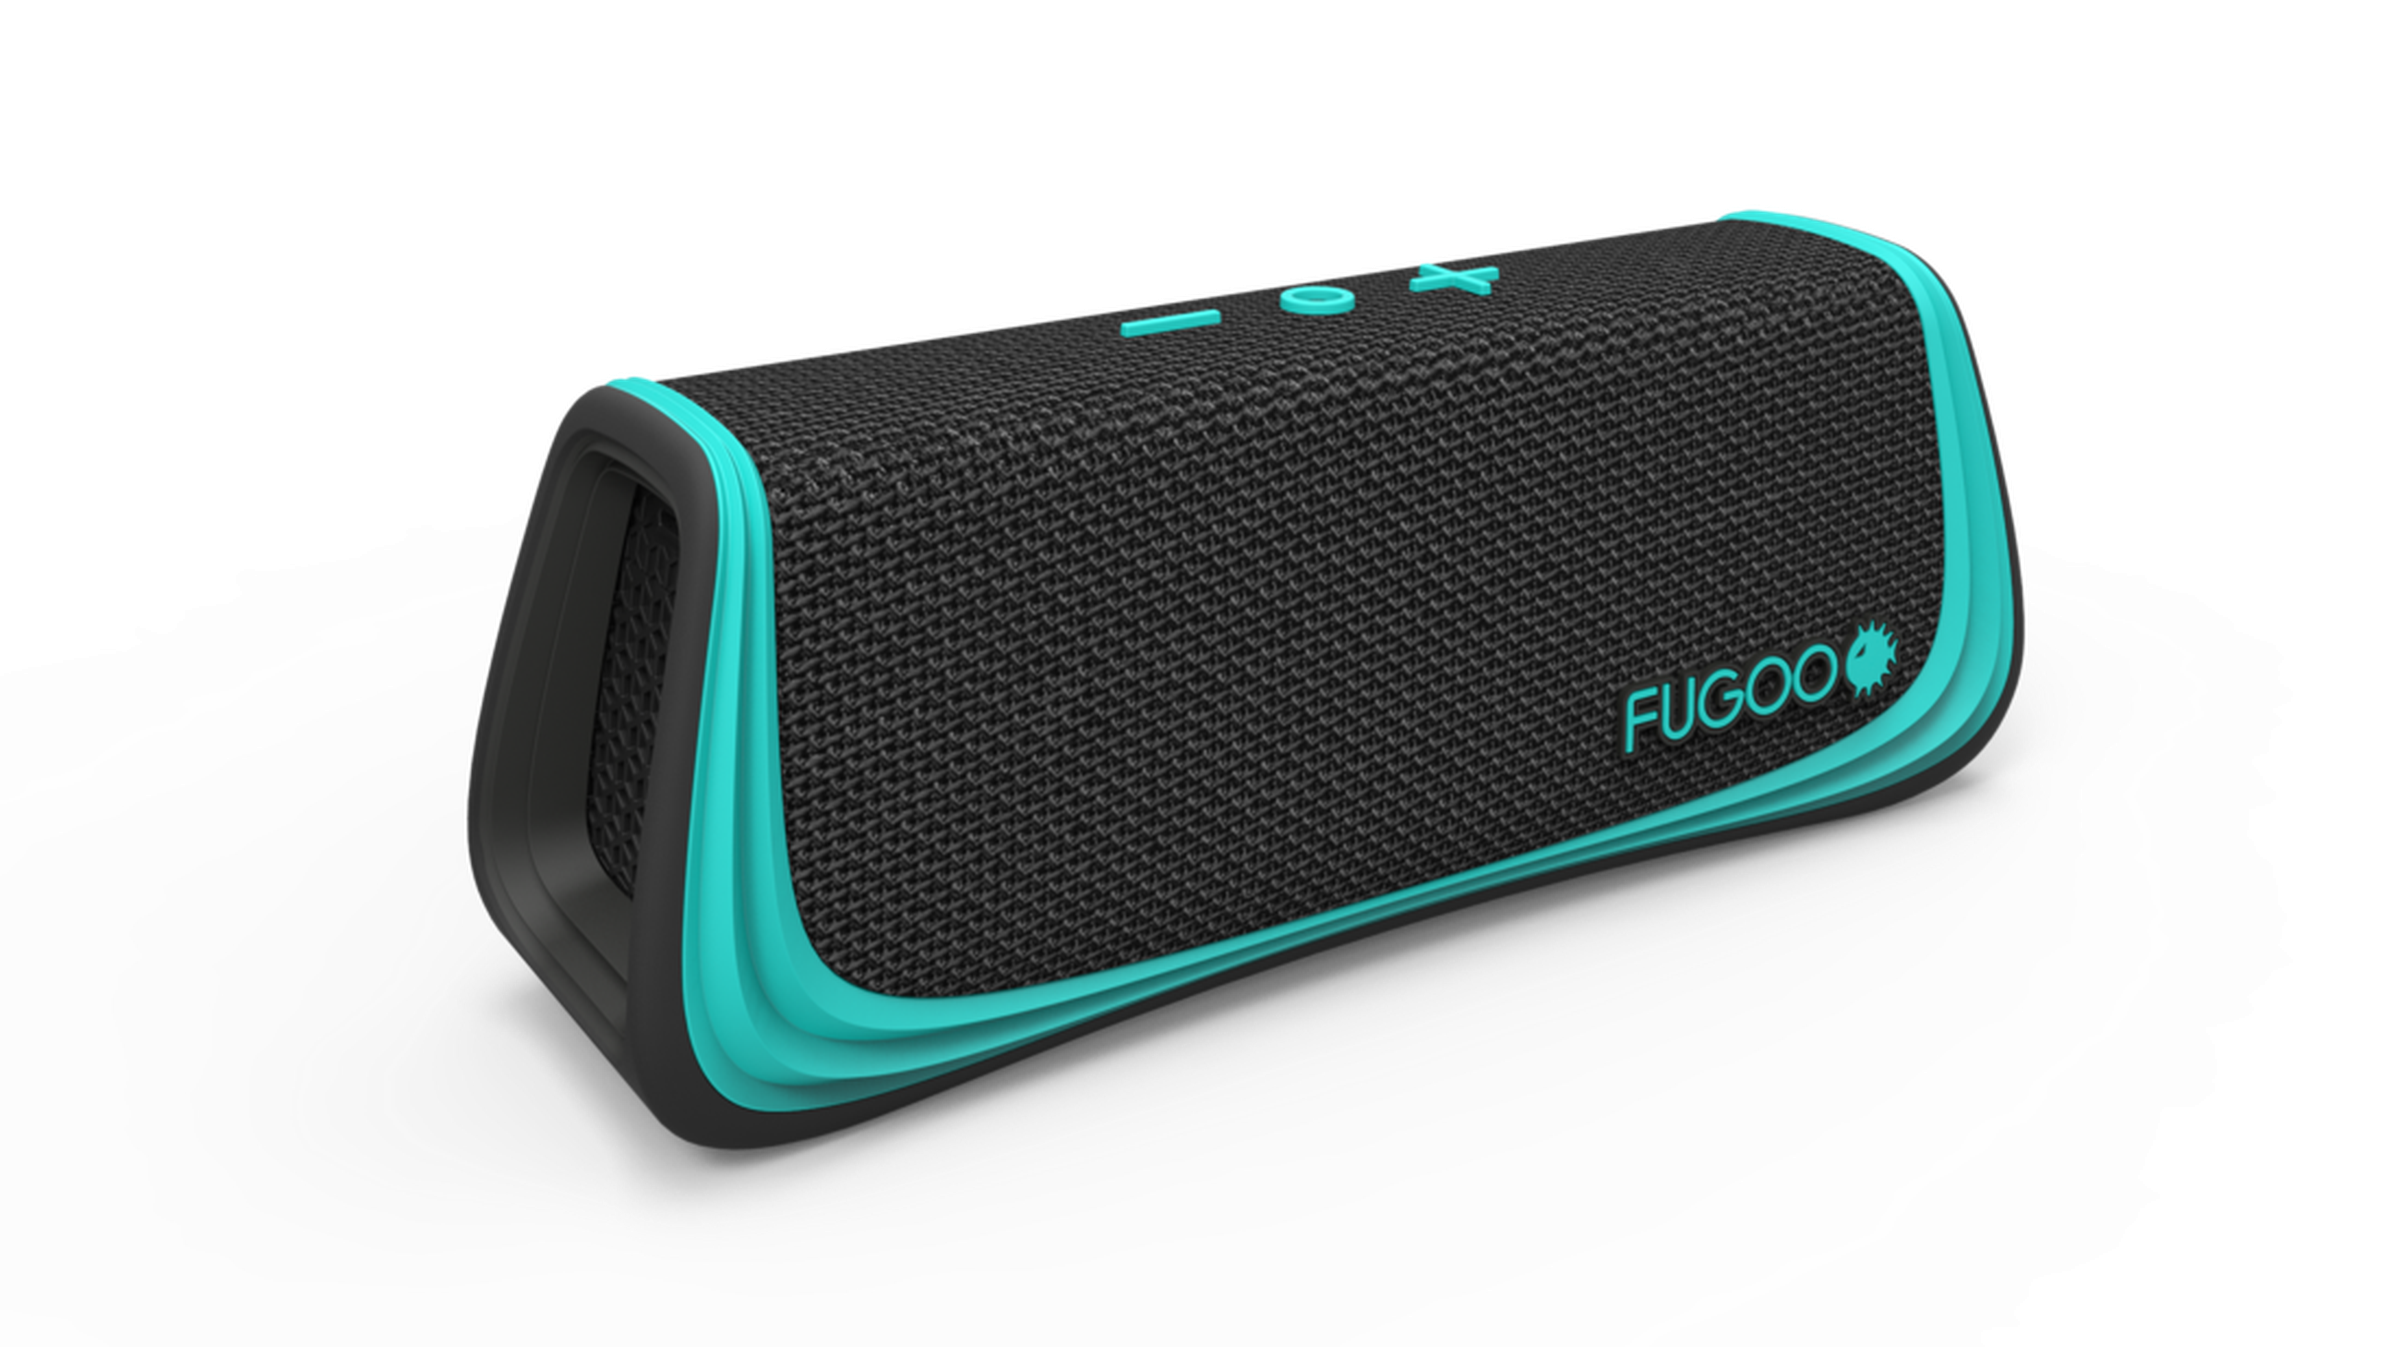 Photos of Fugoo's Bluetooth speakers and accessories